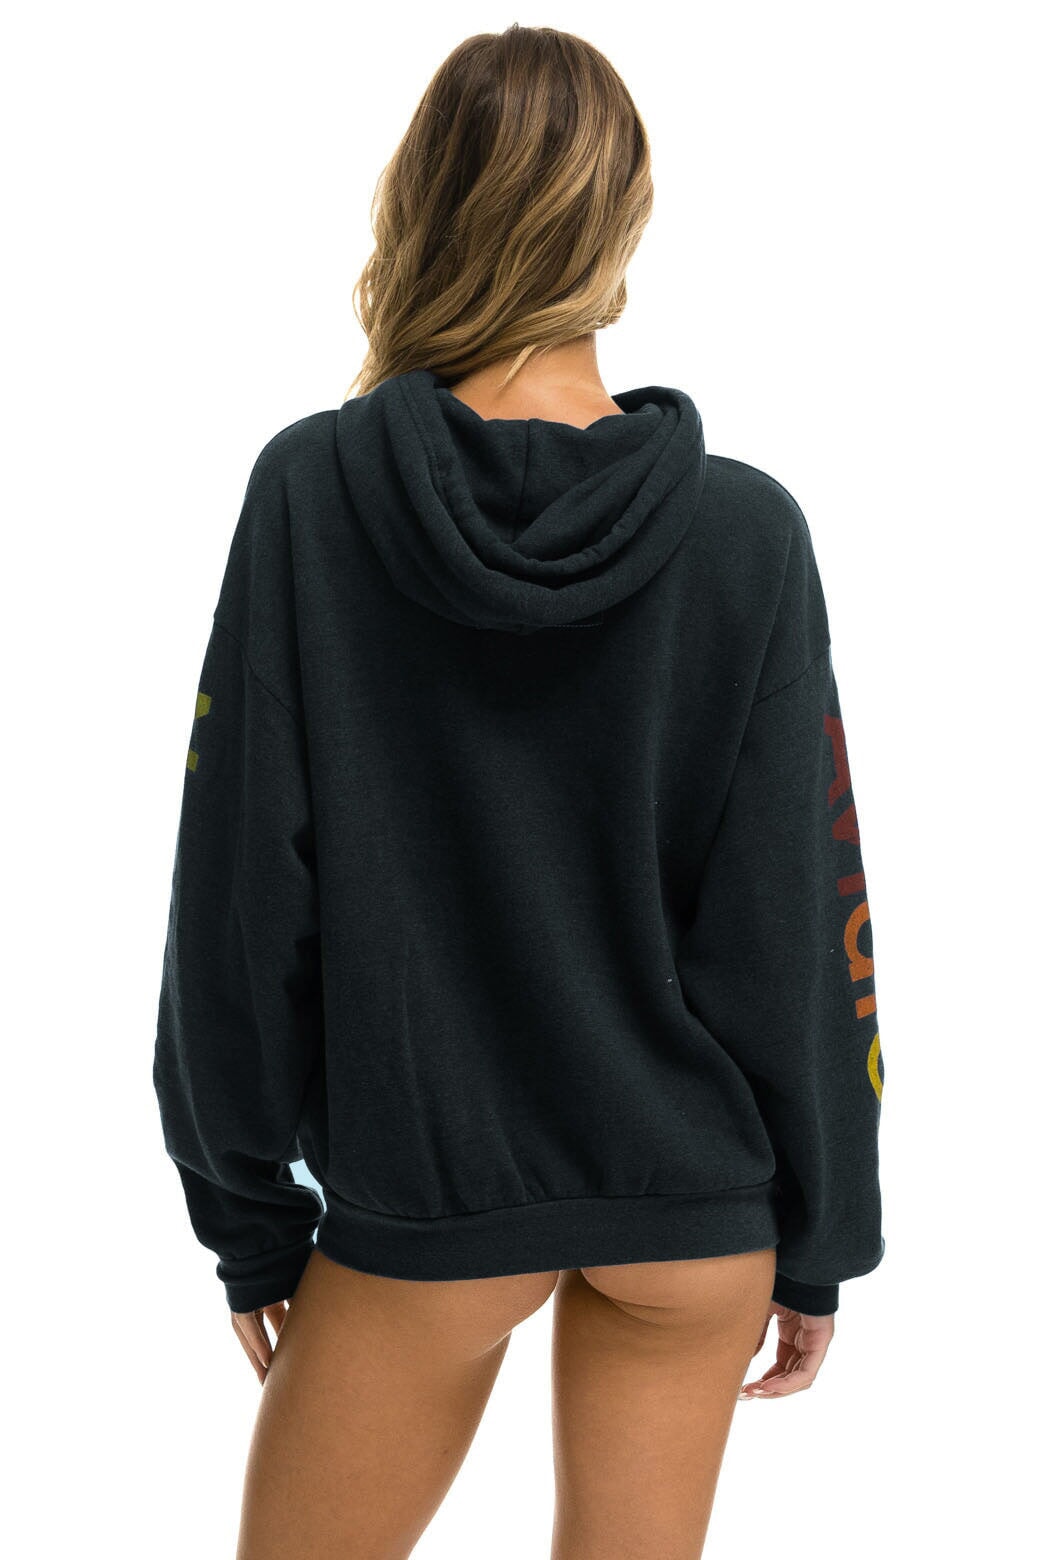 AVIATOR NATION VAIL RELAXED PULLOVER HOODIE - CHARCOAL Hoodie Aviator Nation 